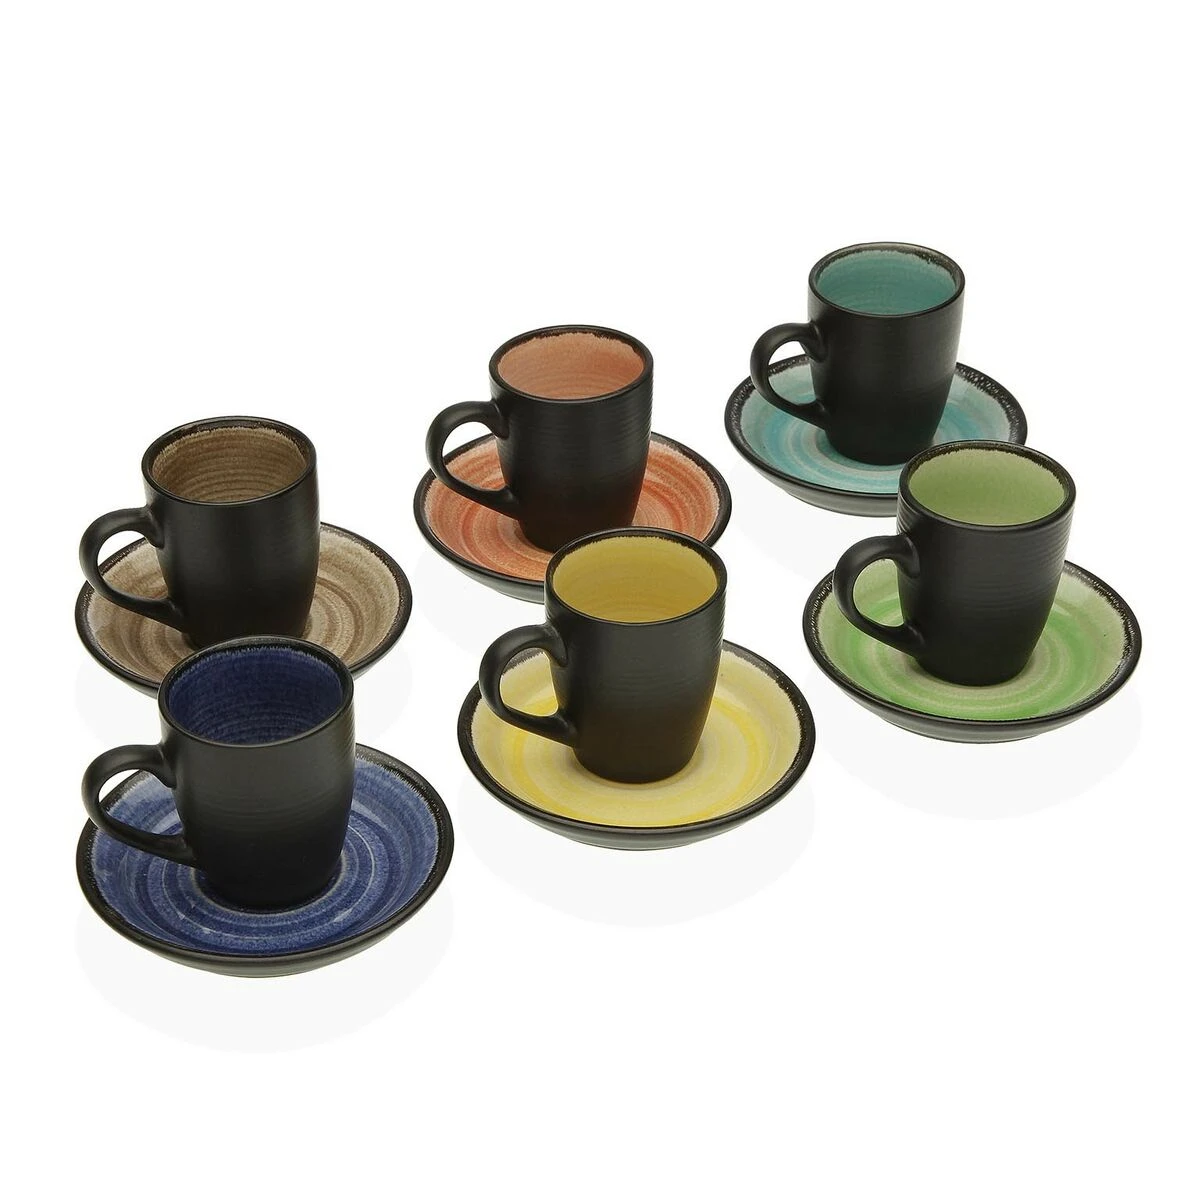 Set of 6 colorful cups and saucers